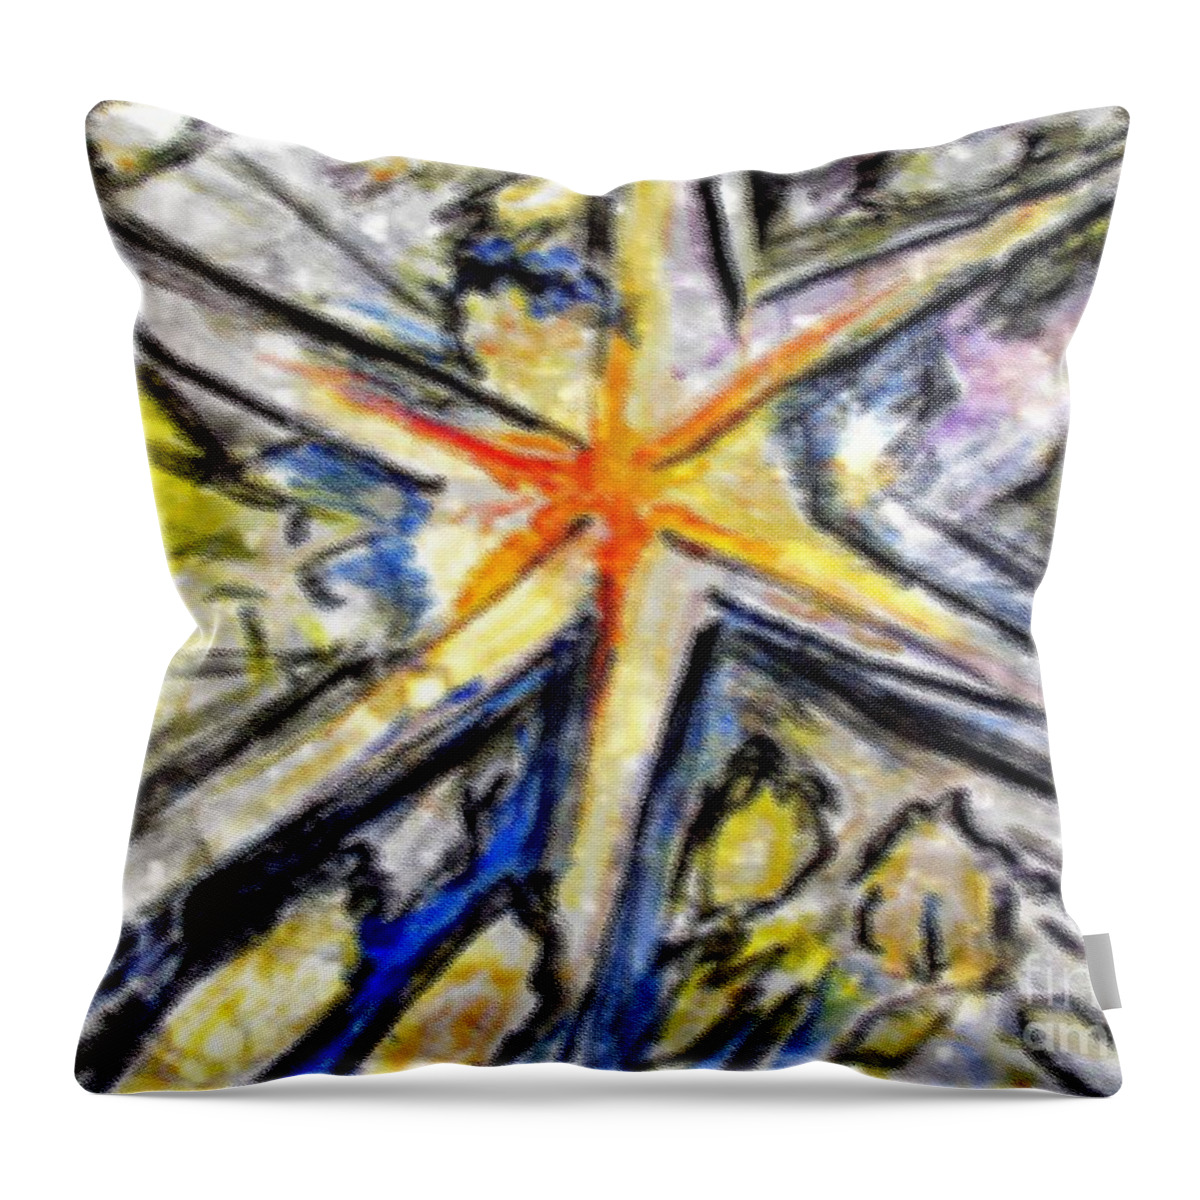 Big Bang Throw Pillow featuring the painting Big Bang Impression by Stanley Morganstein